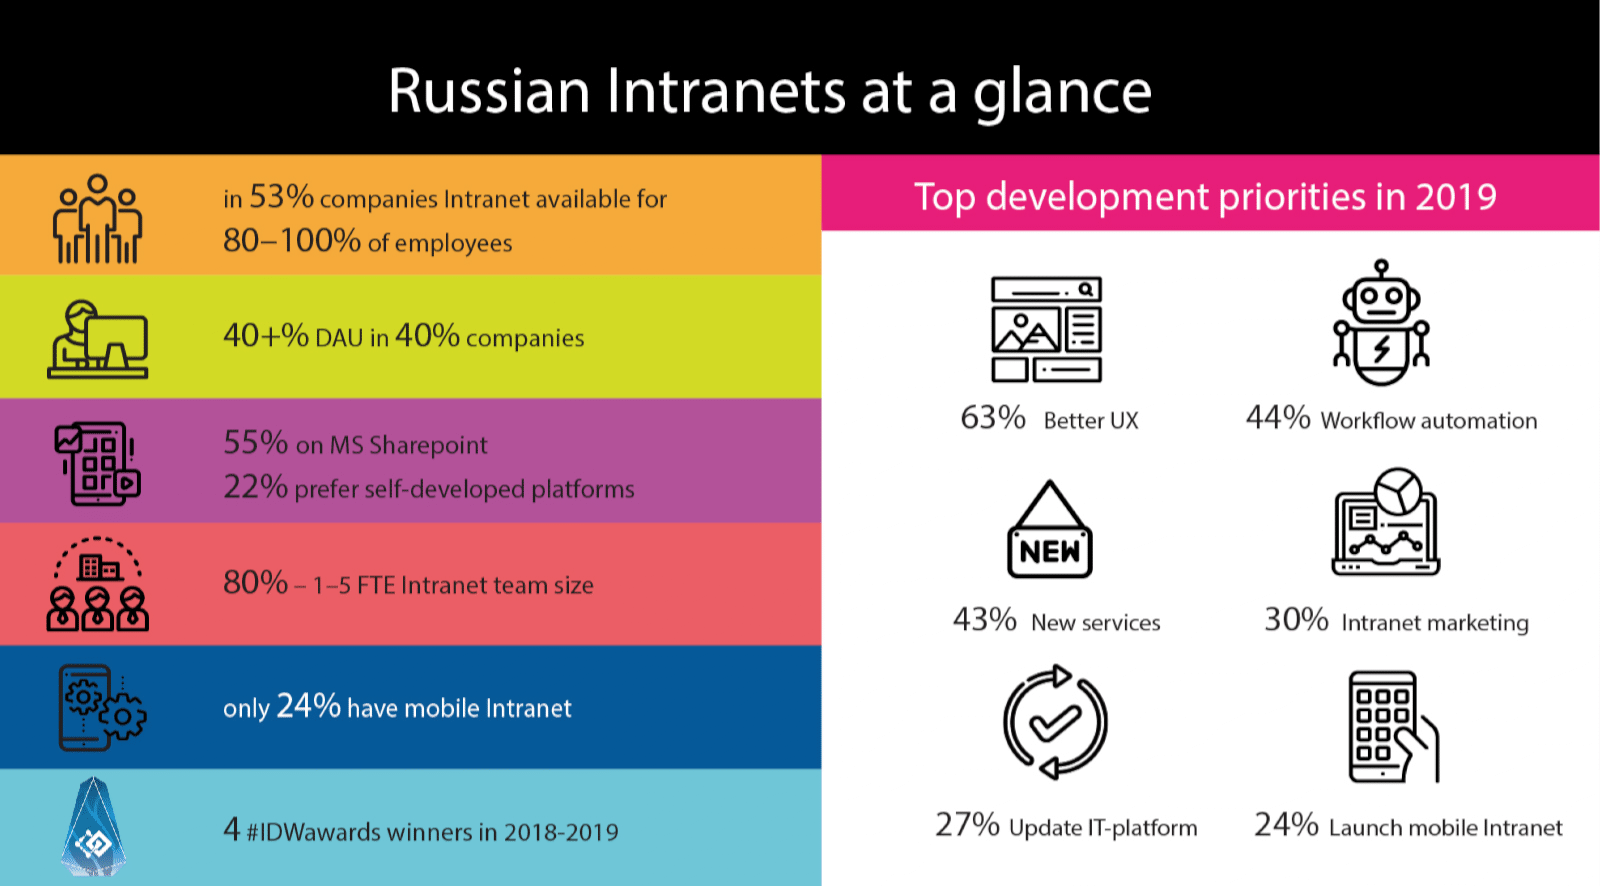 Russian intranets at a glance: In 53% companies intranet available for 80 to 100% of employees. 40% plus DAU in 40% companies. 55% on MS SharePoint. 22% on self-developed platforms. 80% have 1 to 5 people on the intranet team. Only 24% have mobile intranet. Top priorities in 2019: Better UX. Workflow automation. Update the platform. Launch mobile intranet.